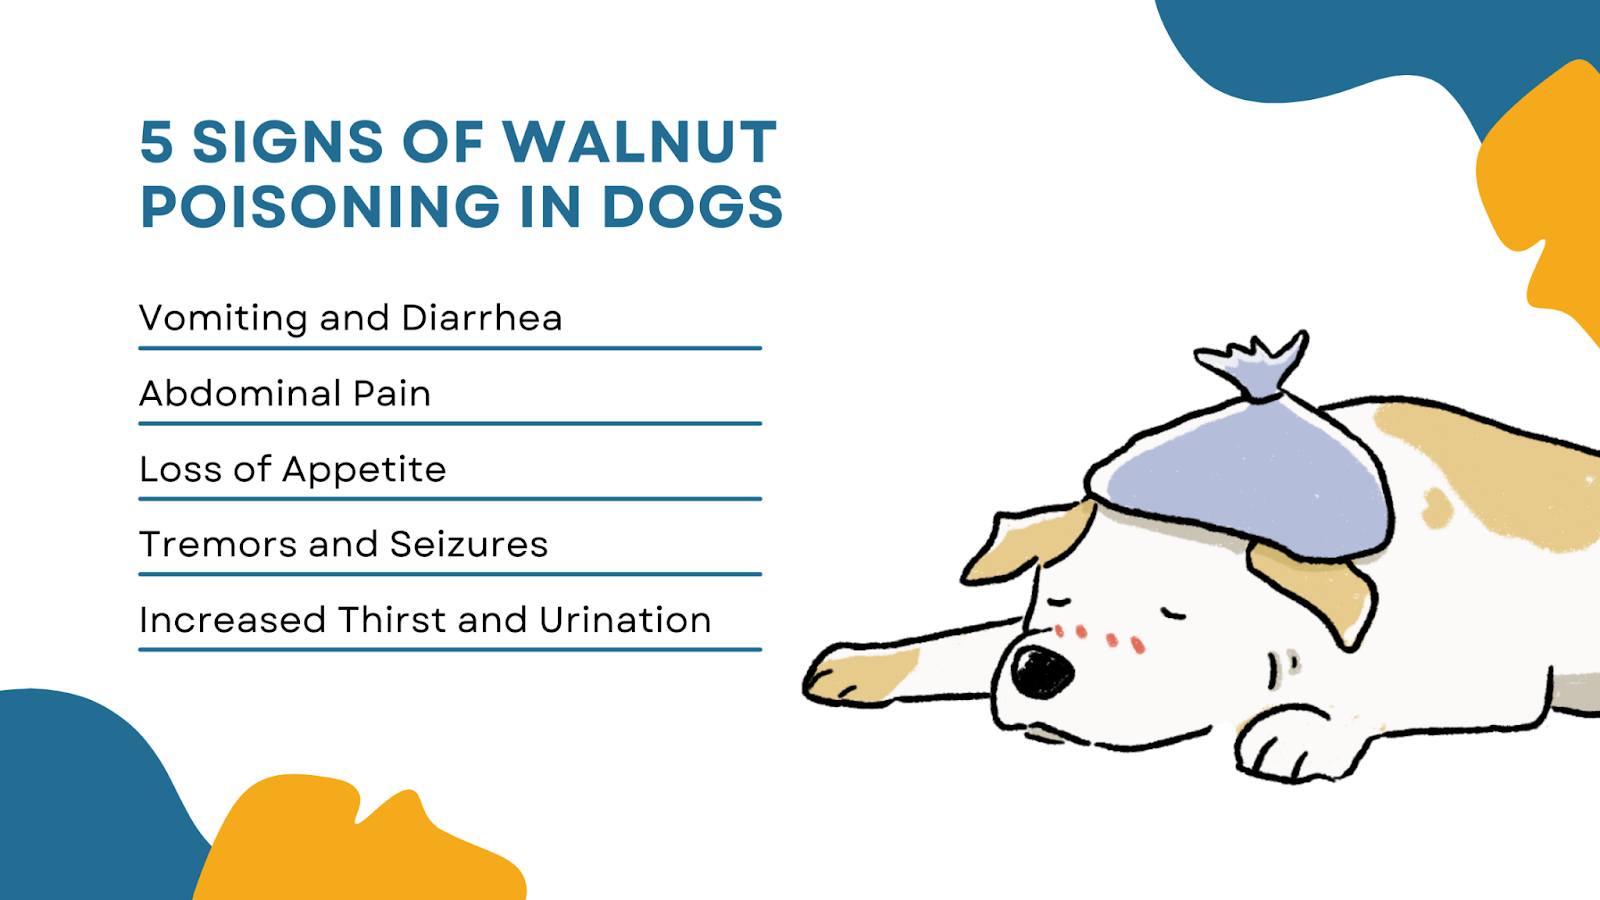 5 signs of walnut poisoning in dogs